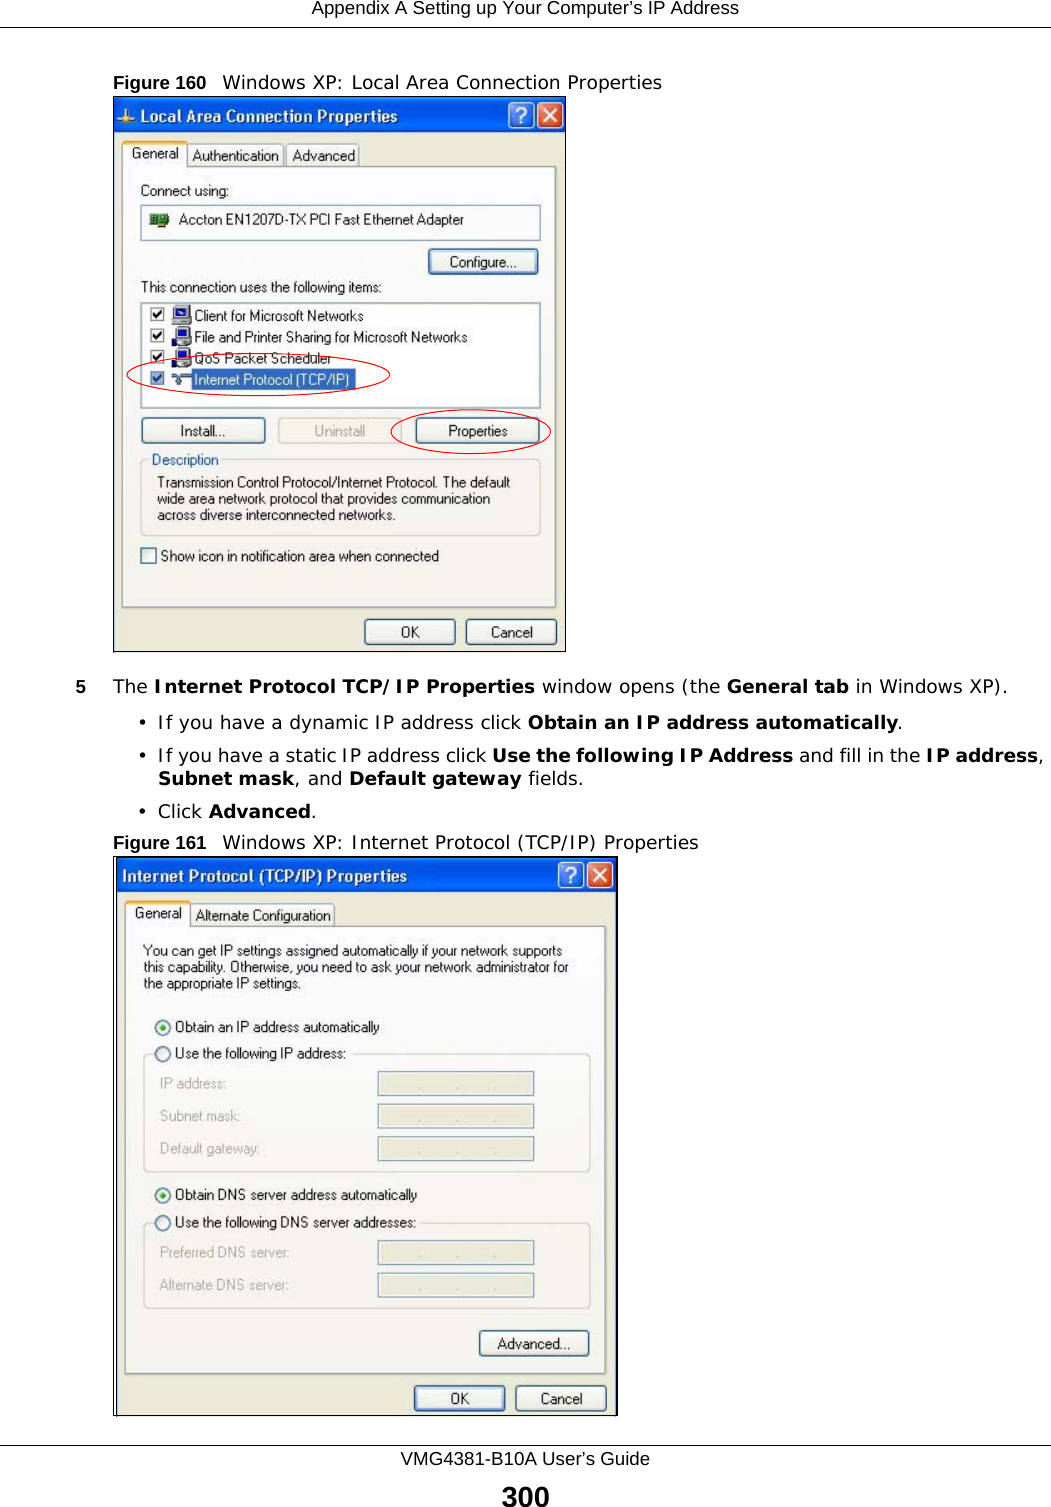 Appendix A Setting up Your Computer’s IP AddressVMG4381-B10A User’s Guide300Figure 160   Windows XP: Local Area Connection Properties5The Internet Protocol TCP/IP Properties window opens (the General tab in Windows XP).• If you have a dynamic IP address click Obtain an IP address automatically.• If you have a static IP address click Use the following IP Address and fill in the IP address, Subnet mask, and Default gateway fields. • Click Advanced.Figure 161   Windows XP: Internet Protocol (TCP/IP) Properties